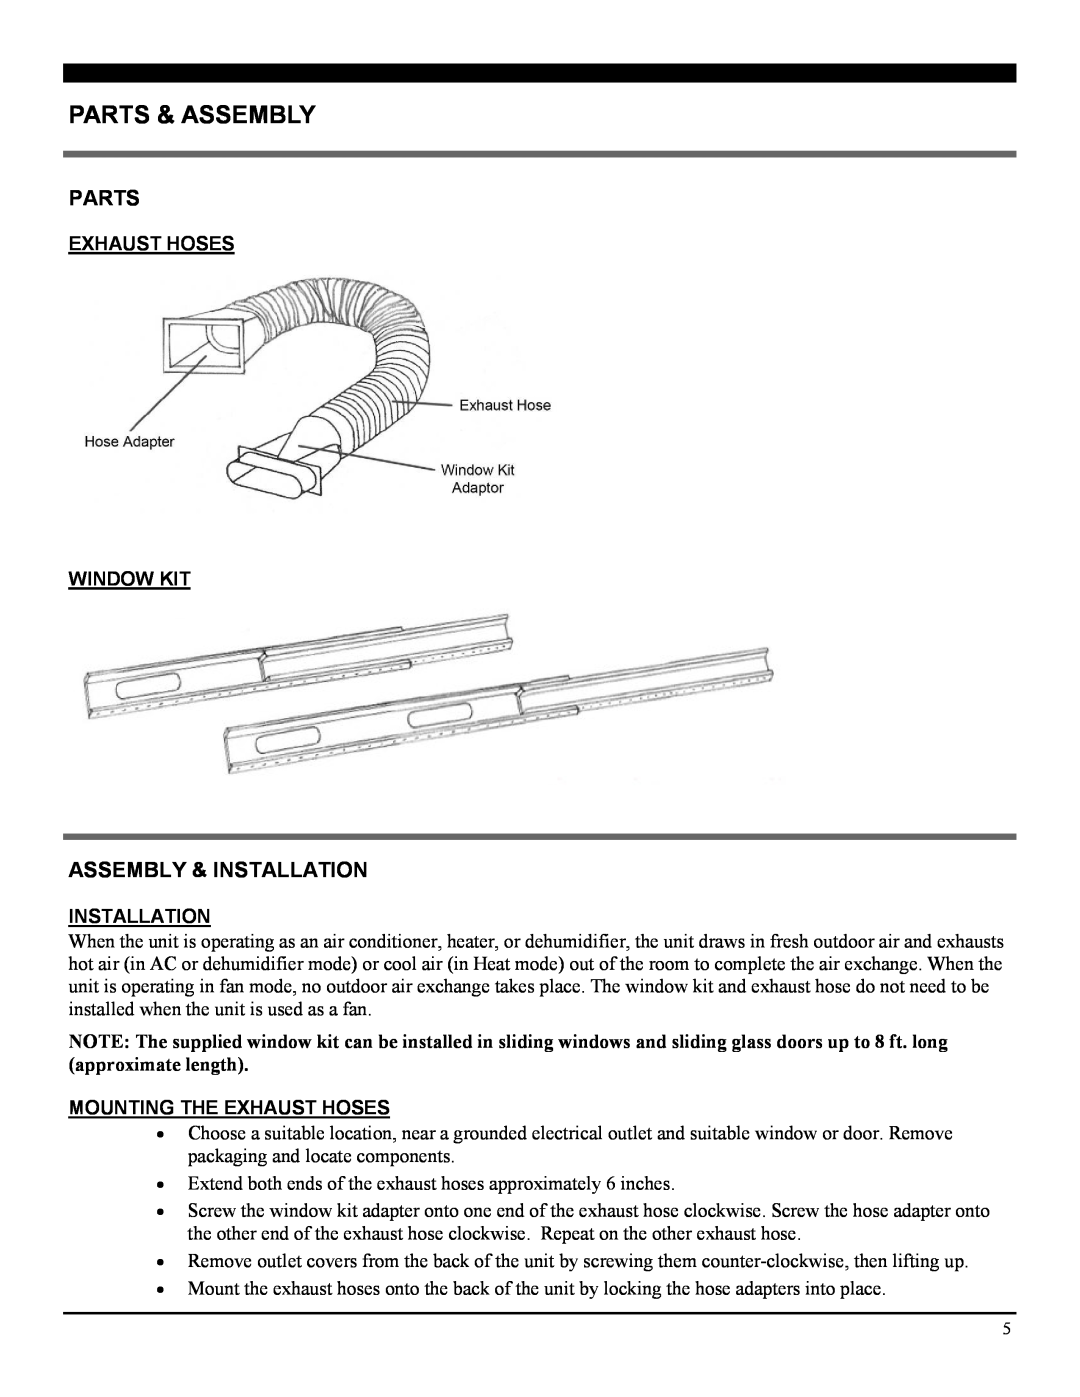 Soleus Air LX-140BL operating instructions Parts & Assembly, Assembly & Installation 